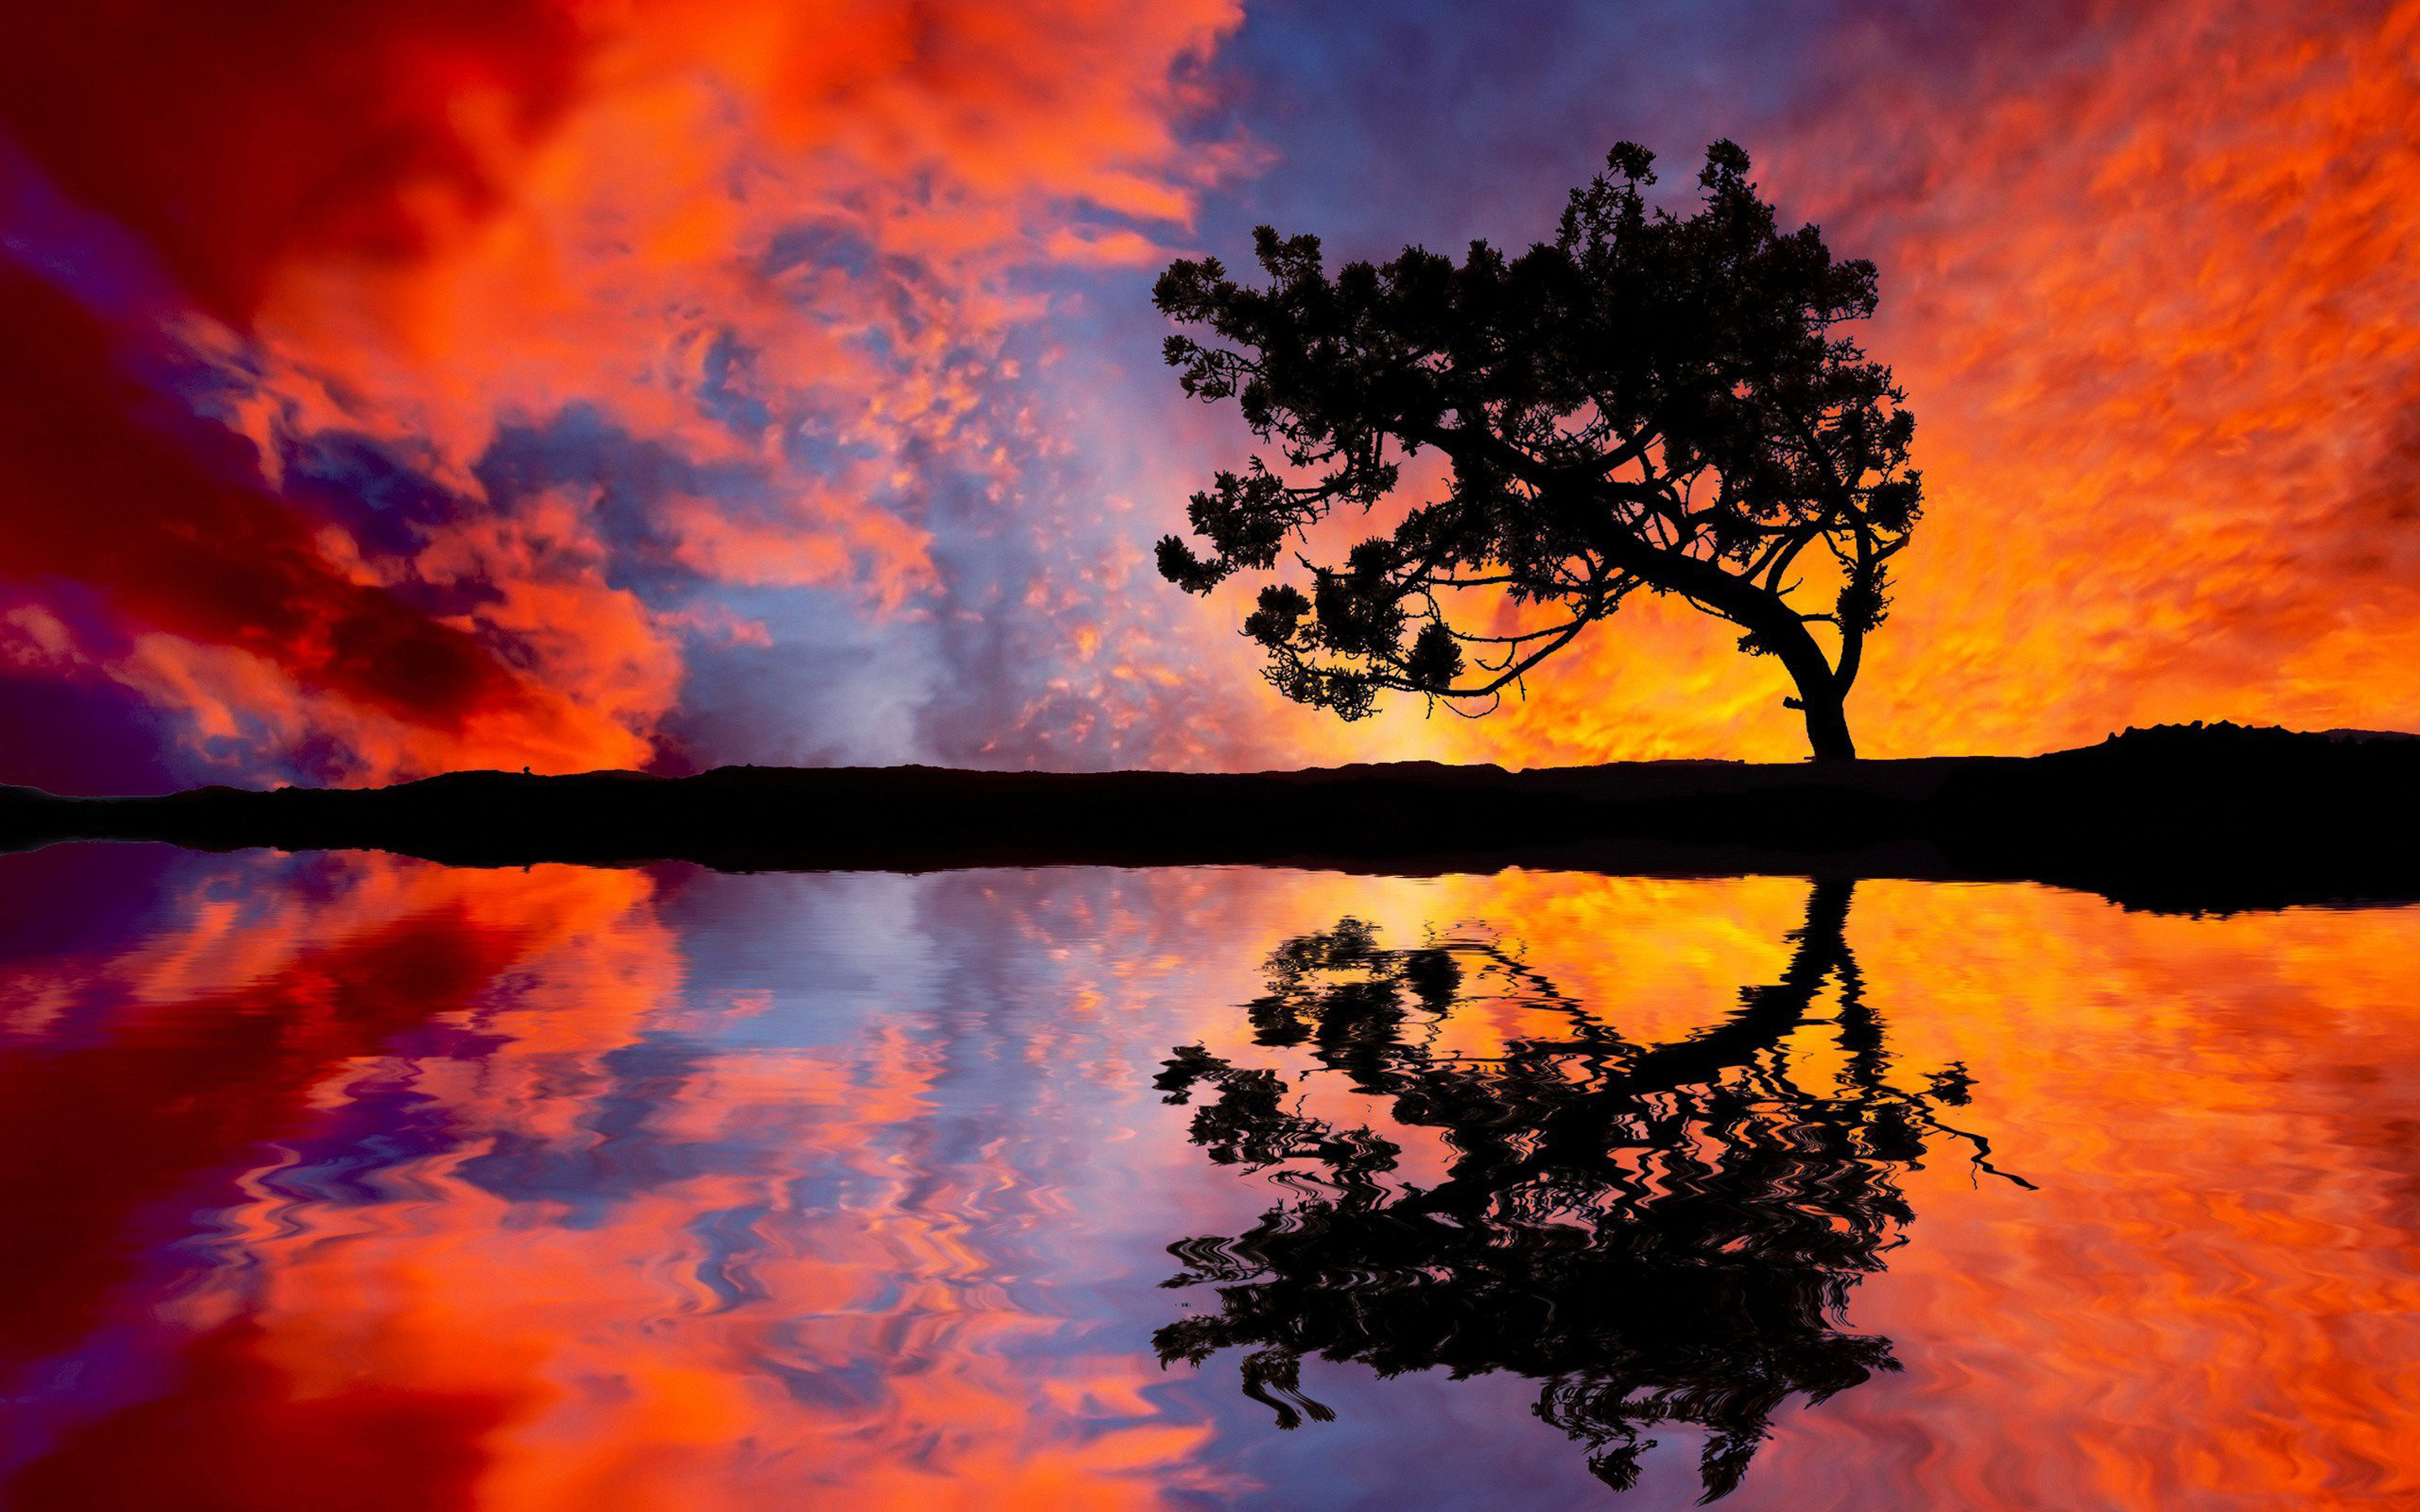 Sunset Tree Reflection Desktop Hd Wallpapers For Mobile Phones And ...